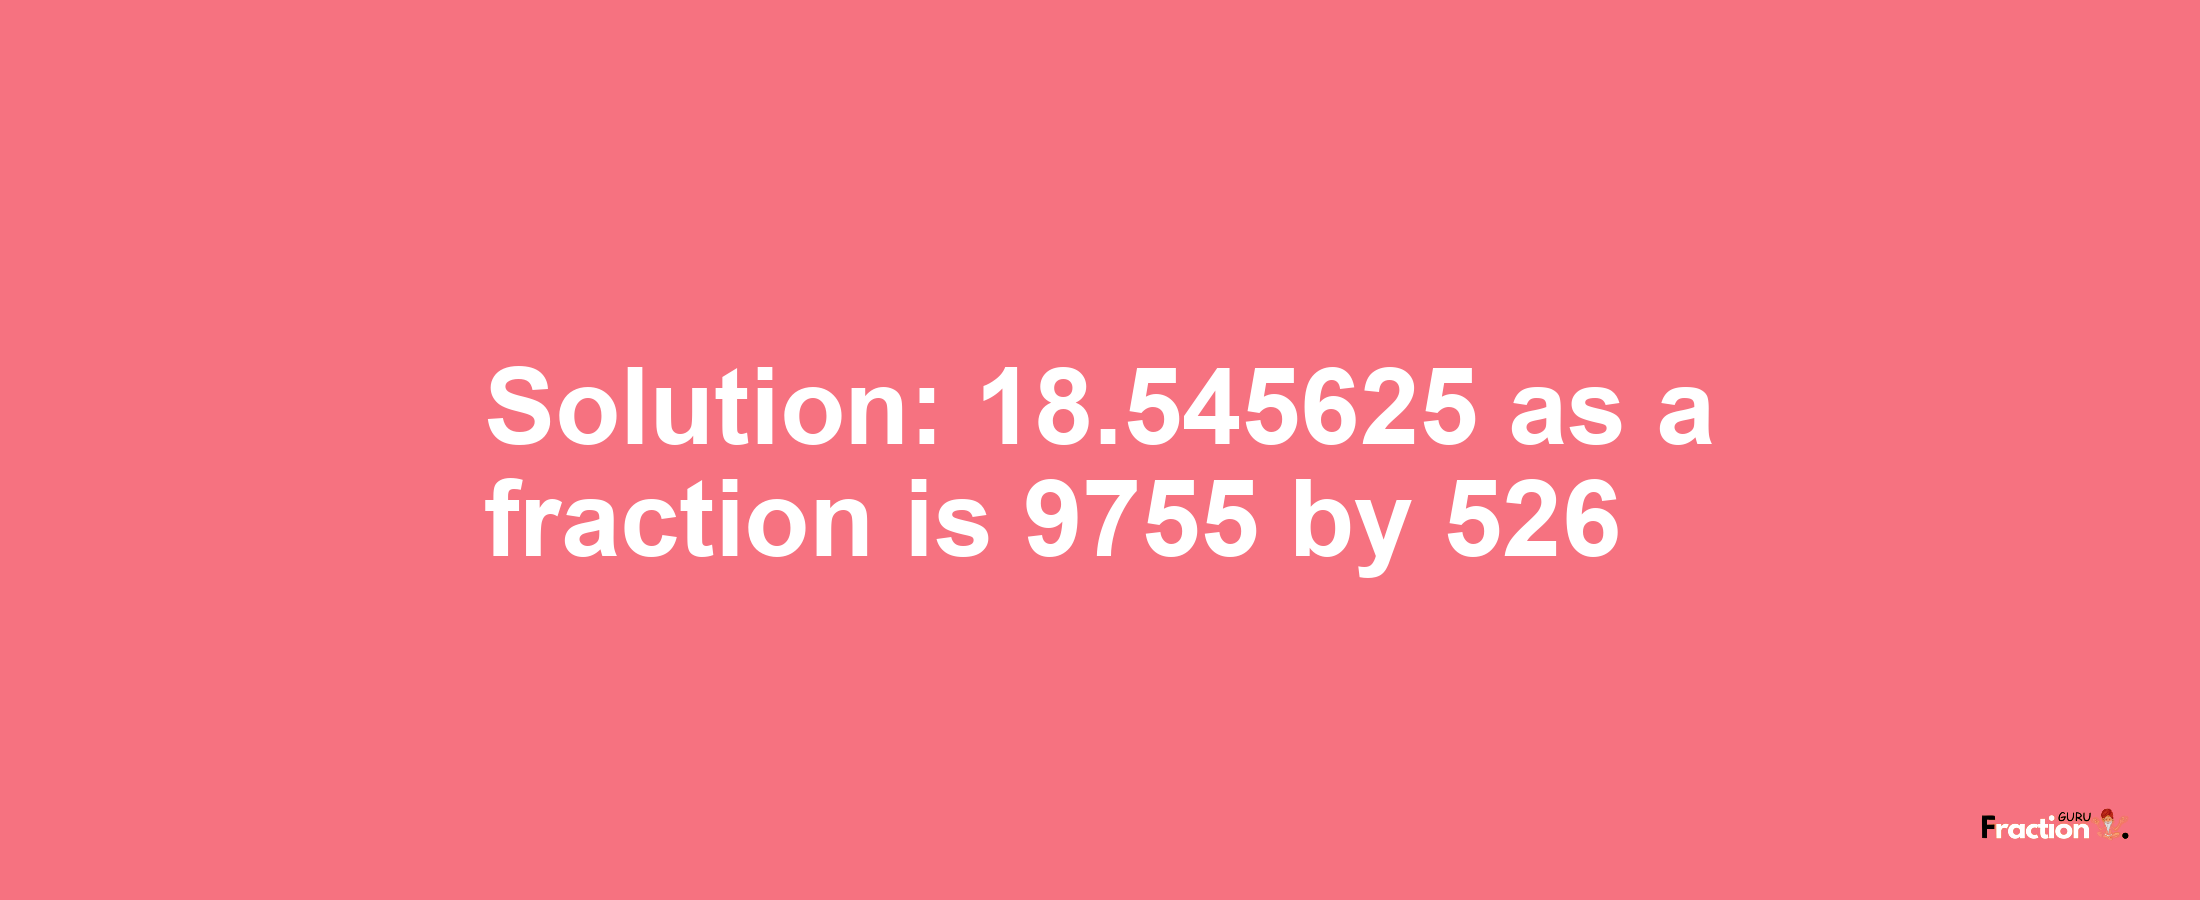 Solution:18.545625 as a fraction is 9755/526